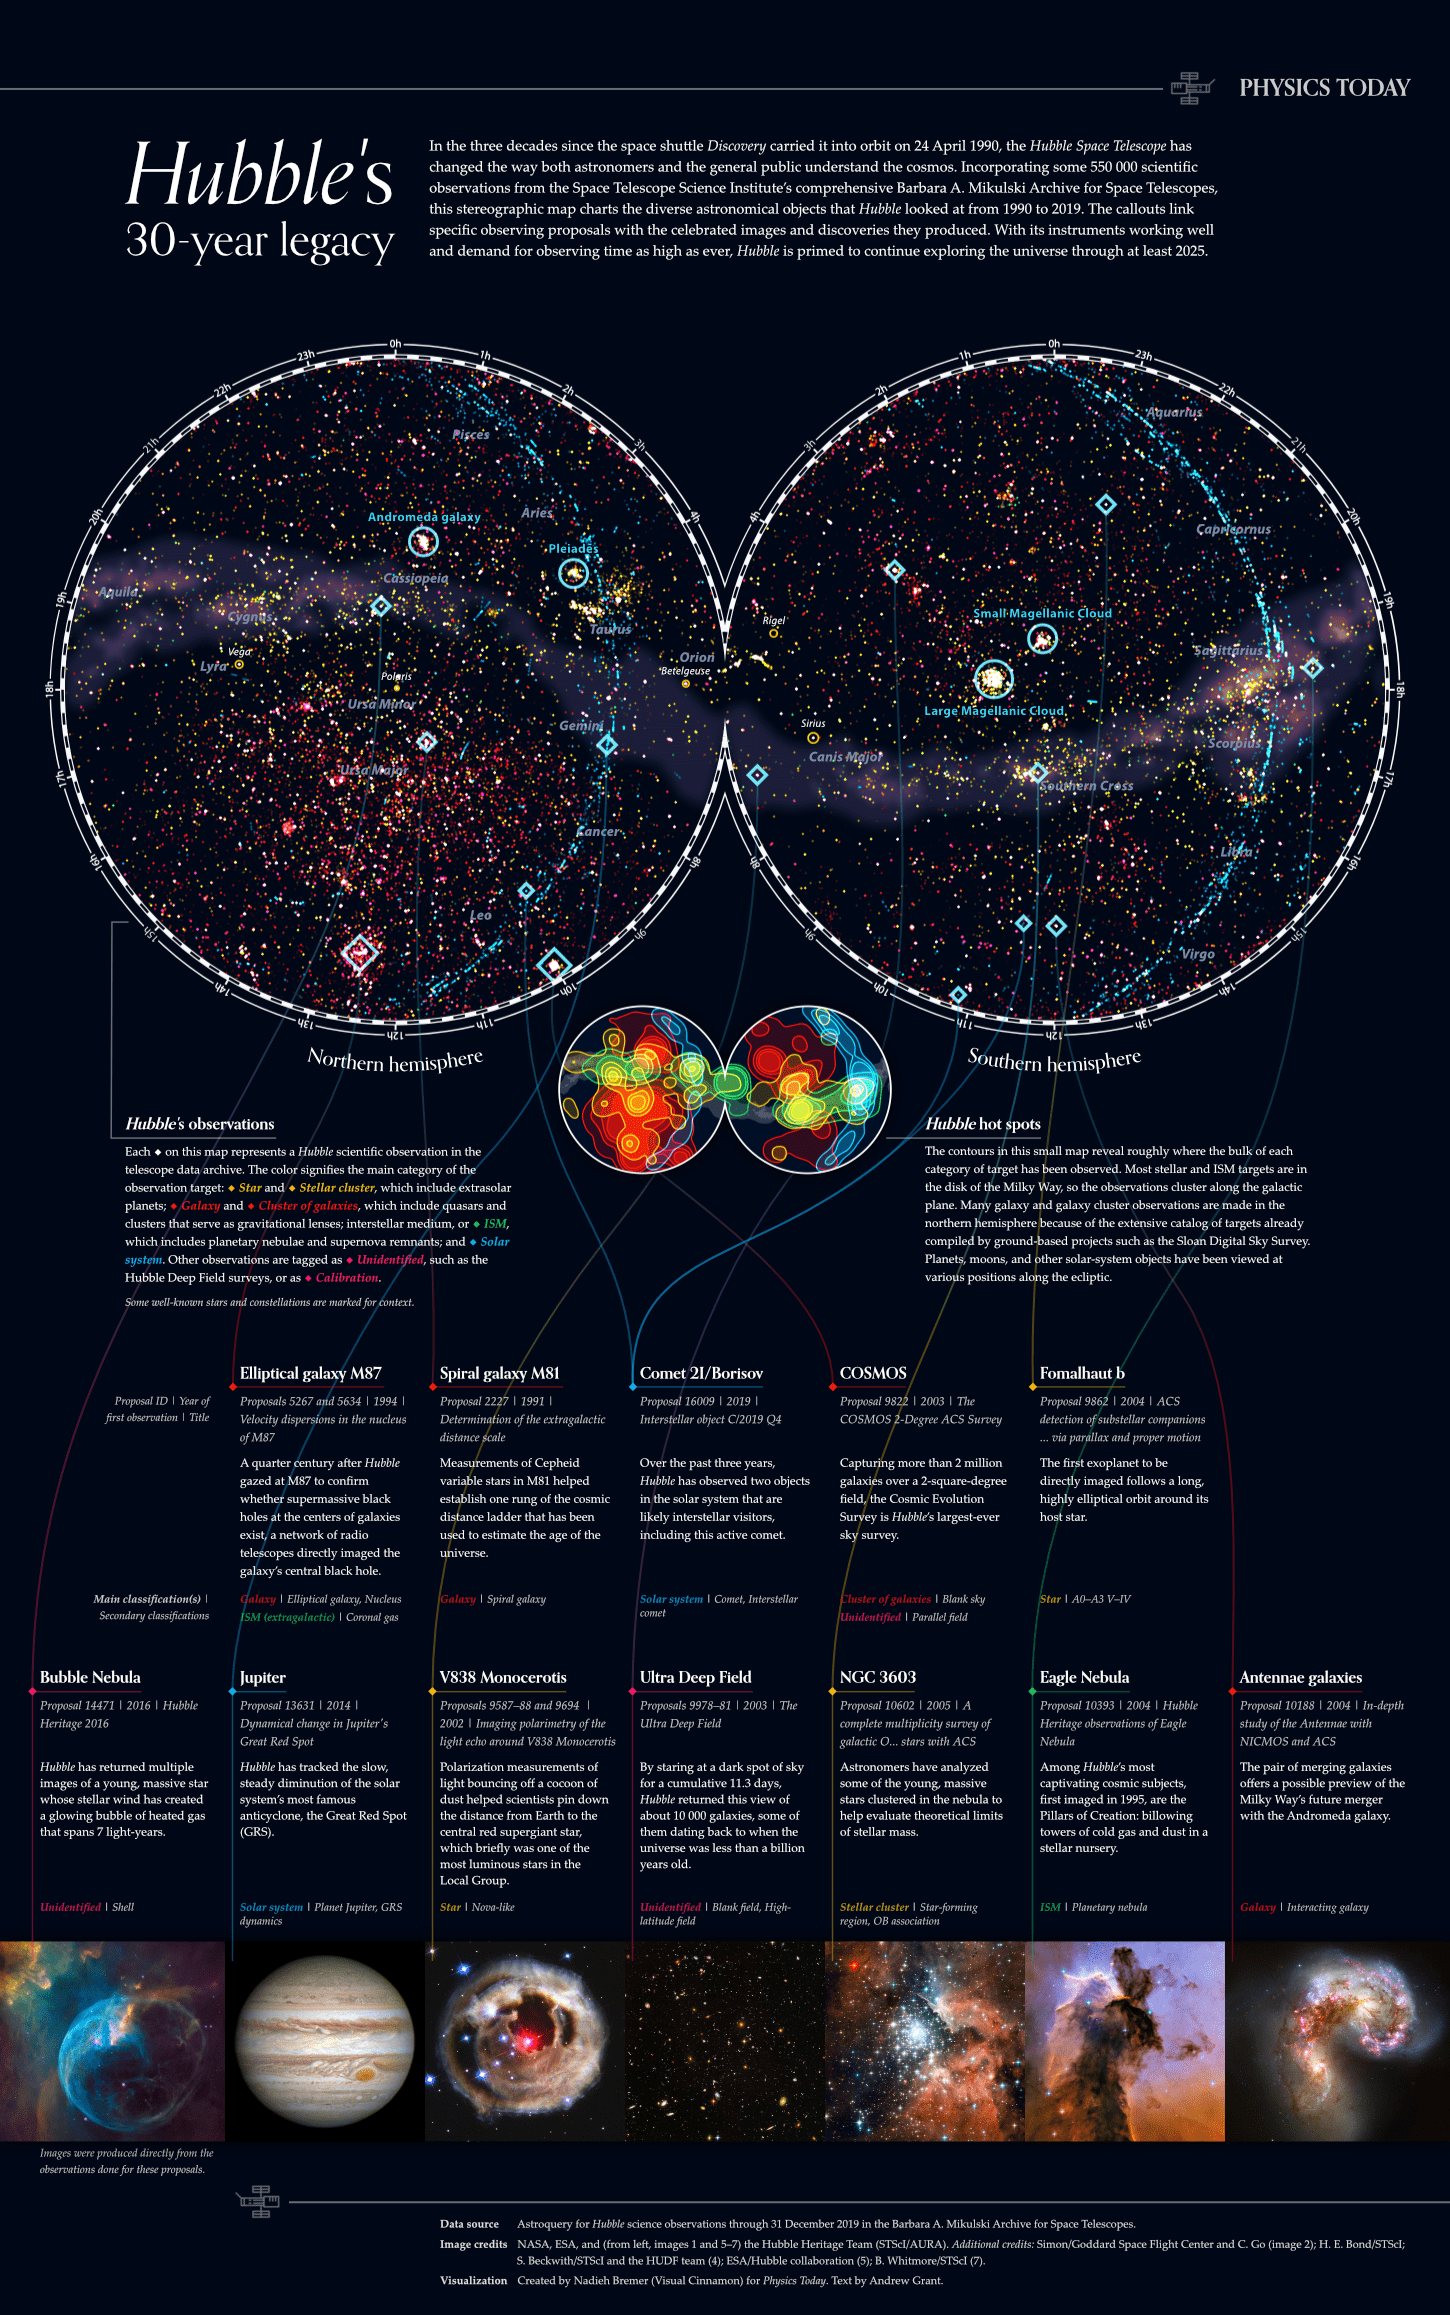 The final poster showing more than 550k observations done by the HST across the sky